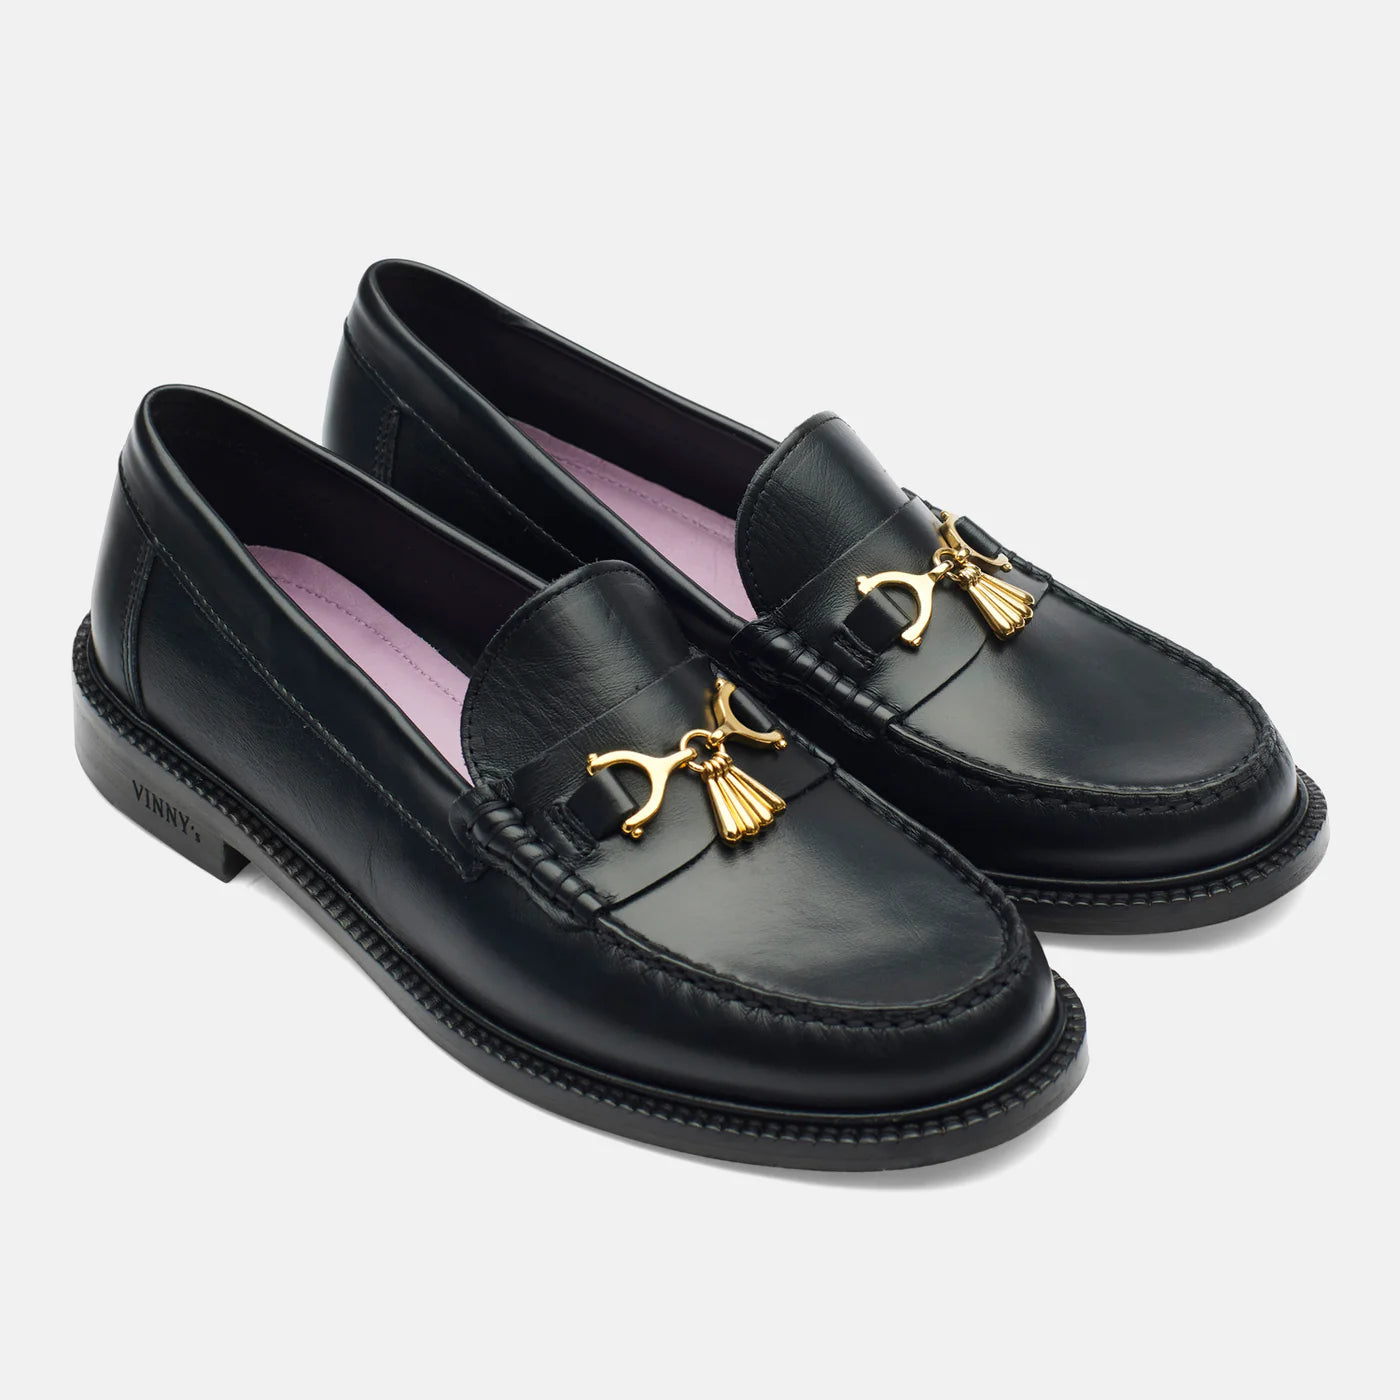 Vinny’s Luxe Mocassin Snaffle Loafer